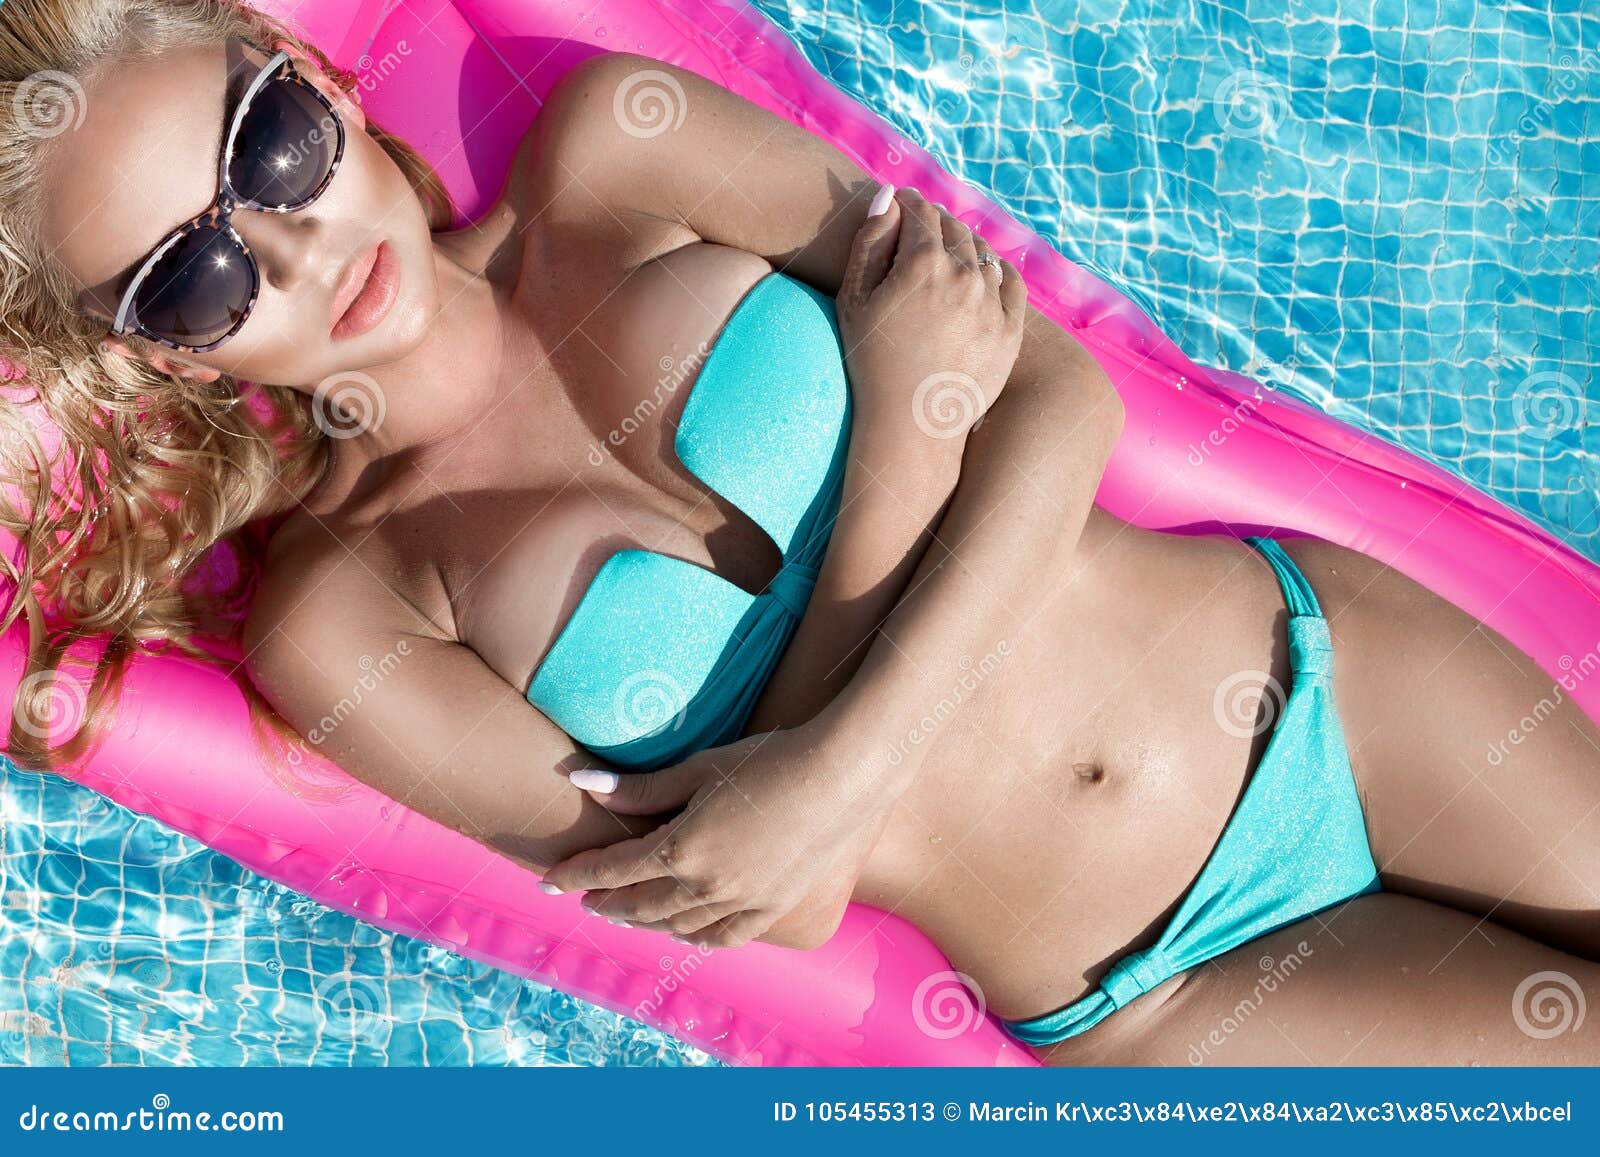 Beautiful Model Model with Long Blonde Wet Hairs, Sunglasses and Bikini Swims in the Pool on a Pink Mattress , Stock Image